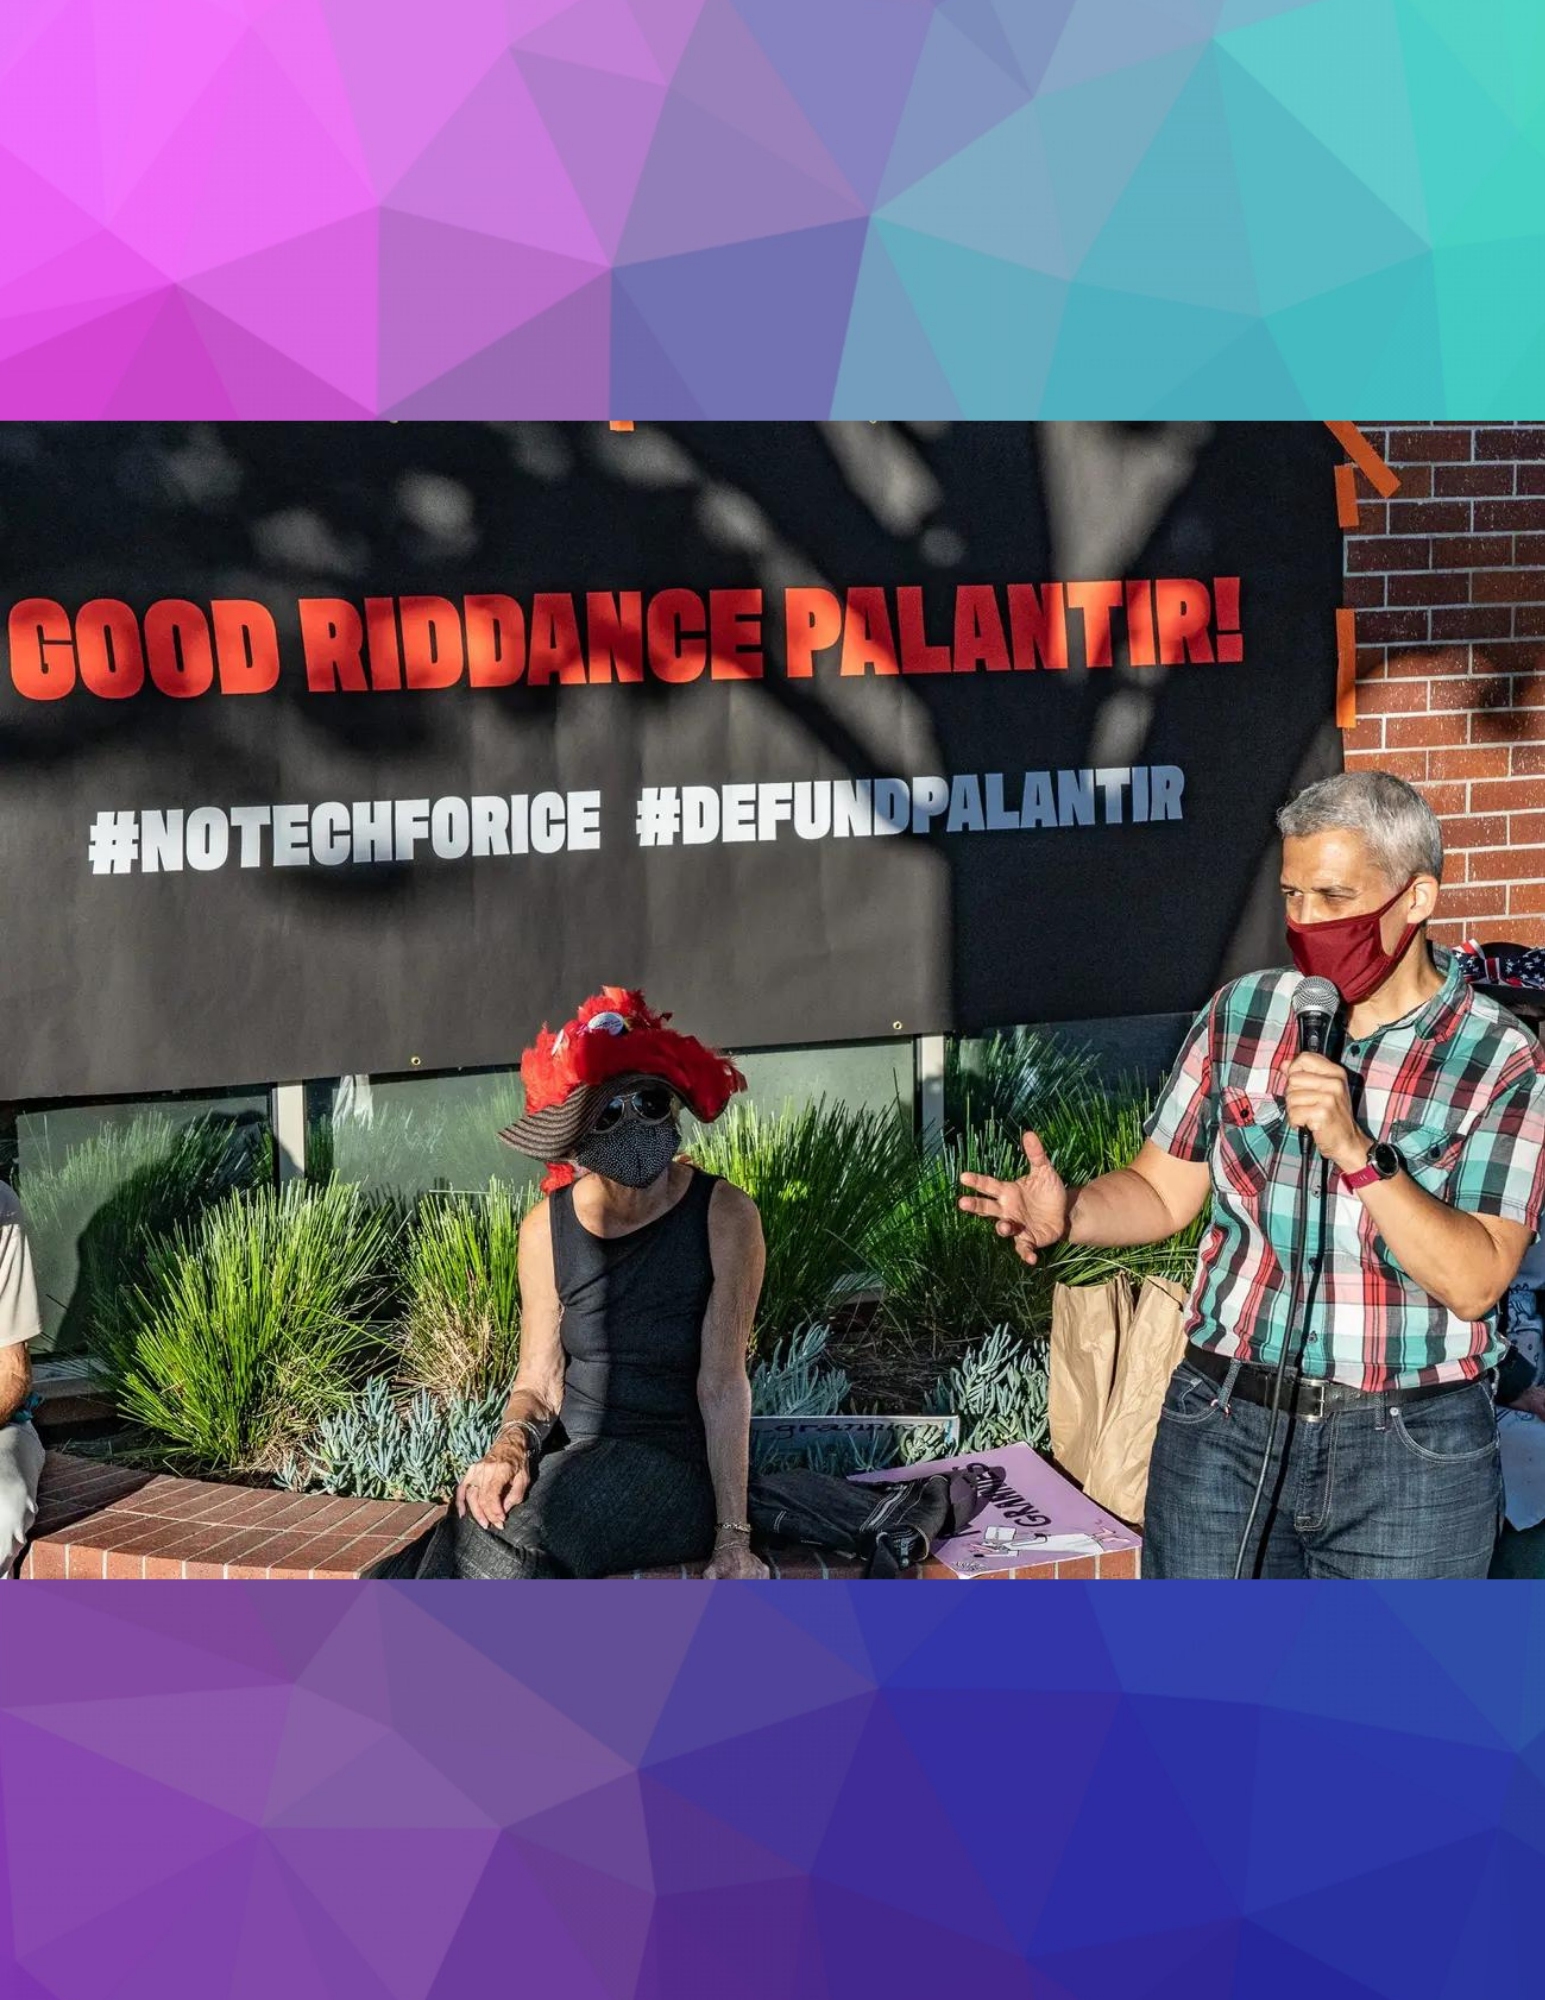 Activists are Chasing Palantir across the US this week to Protest its Contracts with ICE